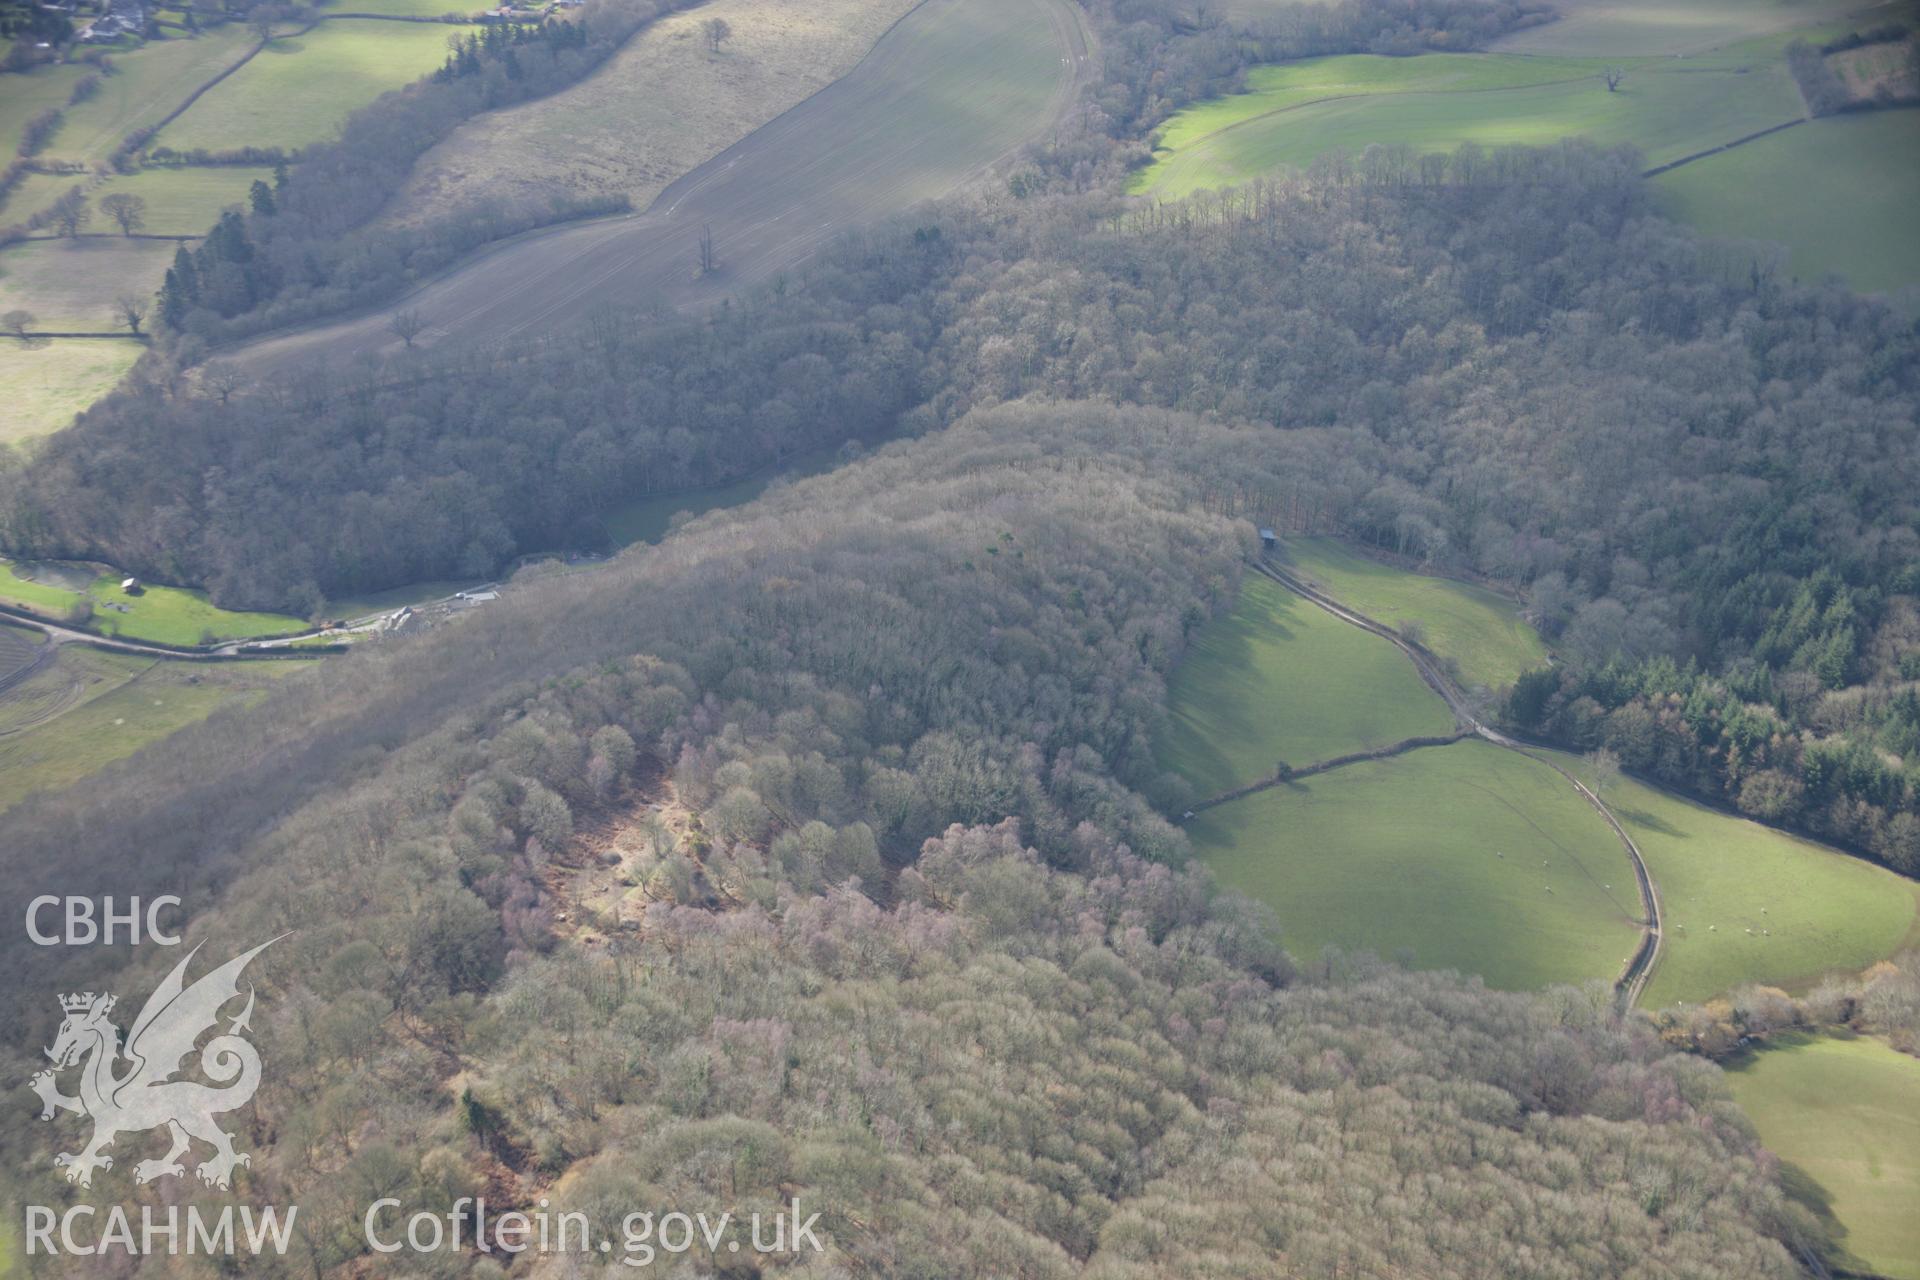 RCAHMW colour oblique aerial photograph of Gaer Fawr, Guilsfield, from the north-east. Taken on 06 March 2006 by Toby Driver.